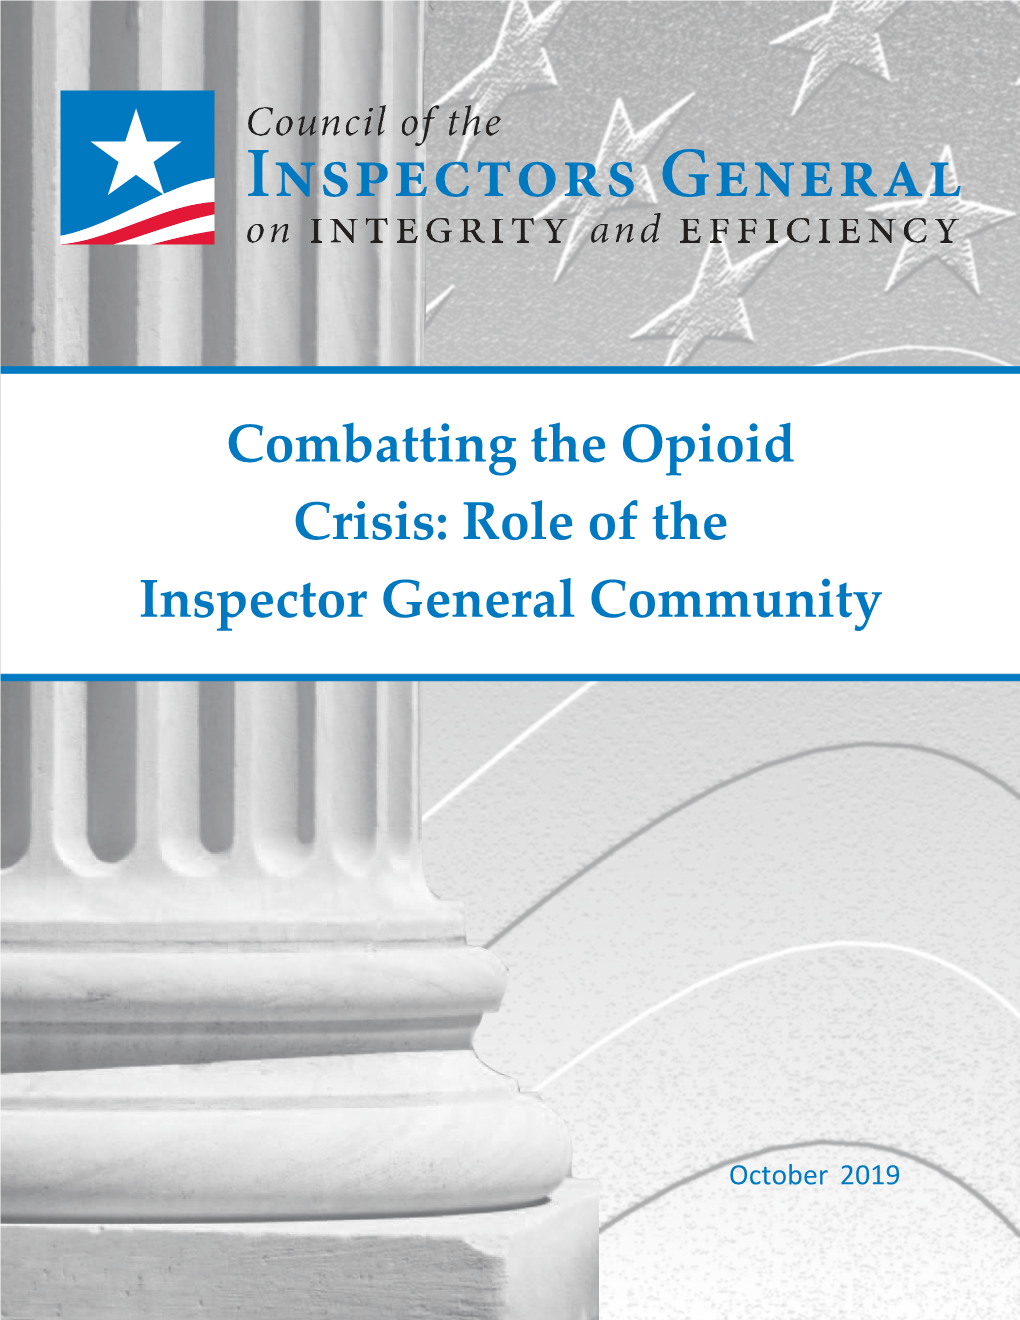 Combatting the Opioid Crisis: Role of the Inspector General Community